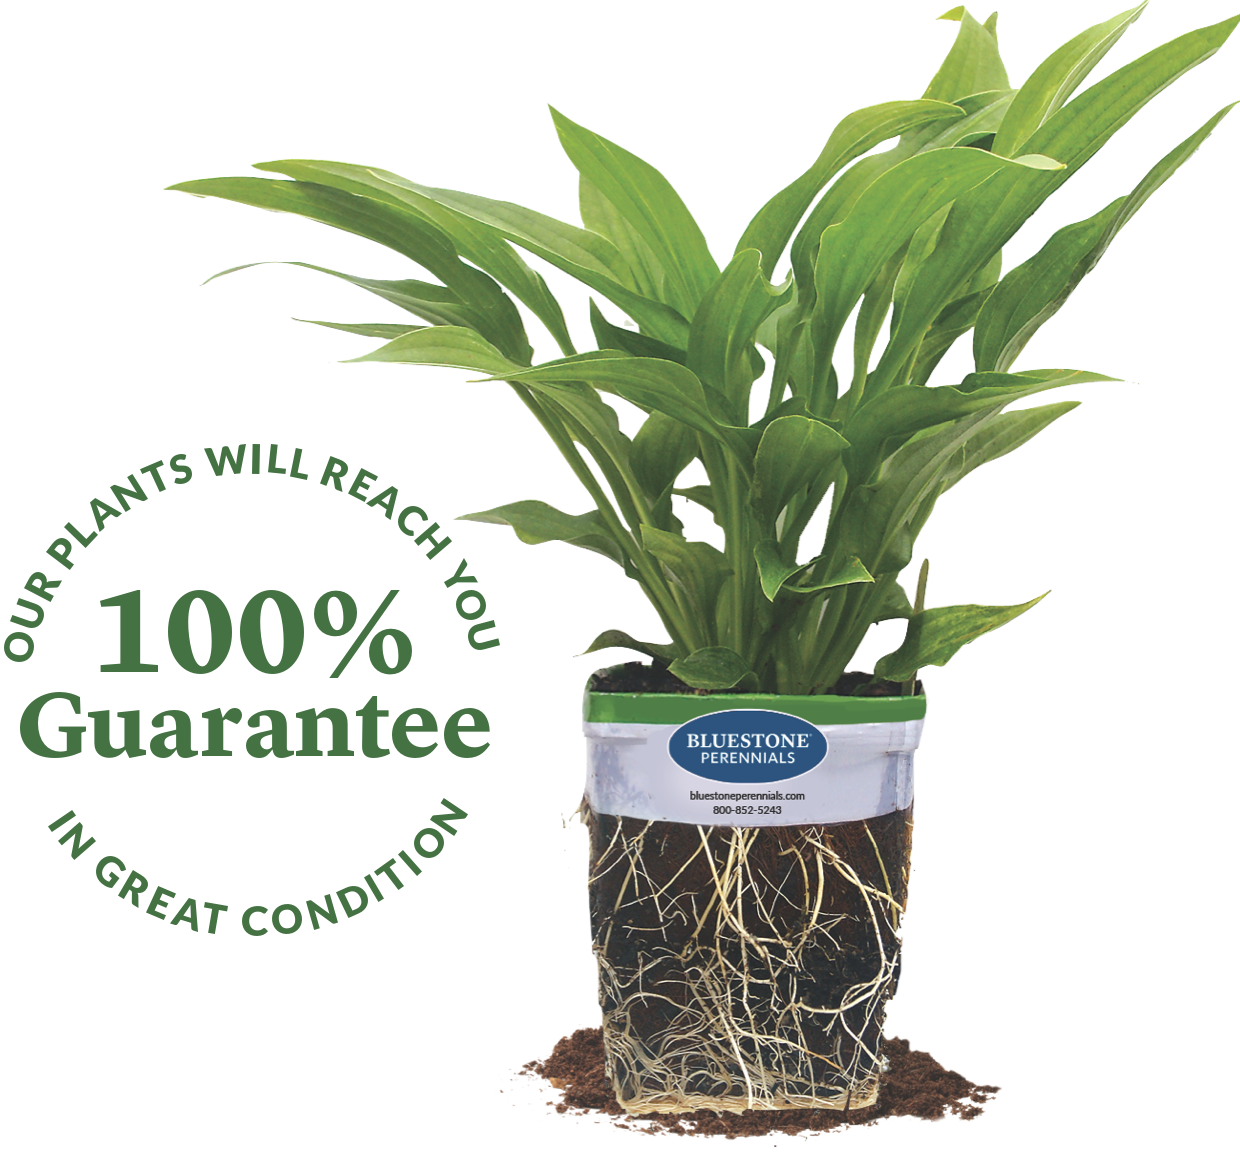 Our plants will reach you in great condition. 100% guarantee